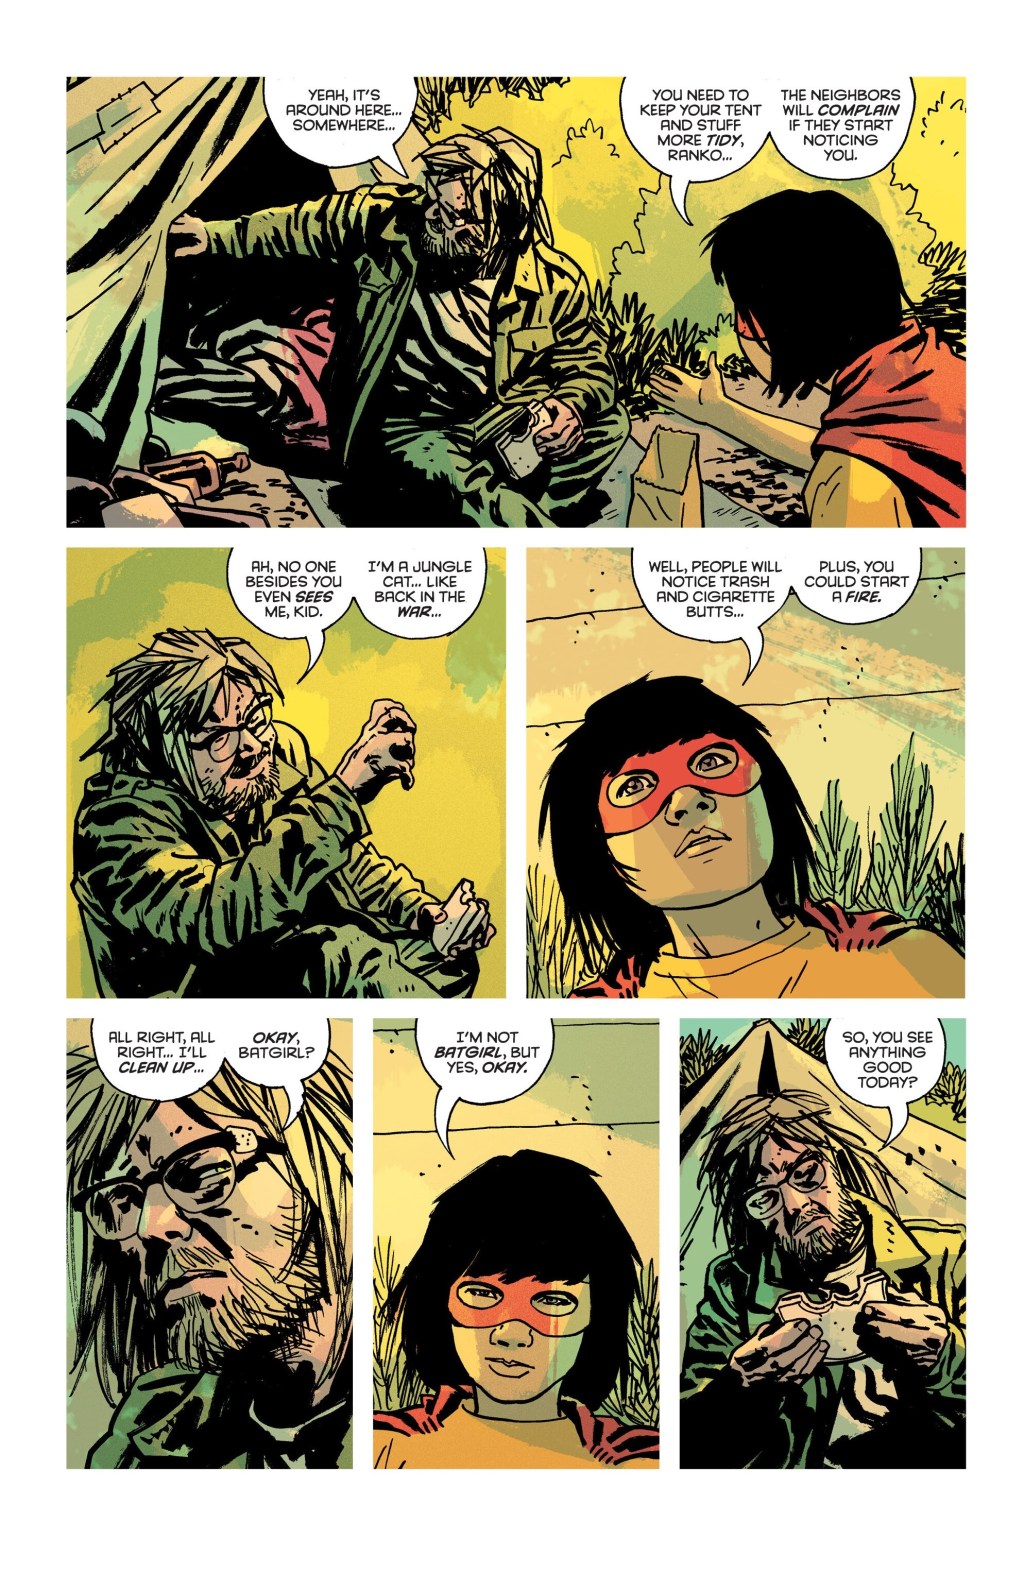 Where The Body Was (2023), Image Comics. Words by Ed Brubaker. Art by Sean Phillips